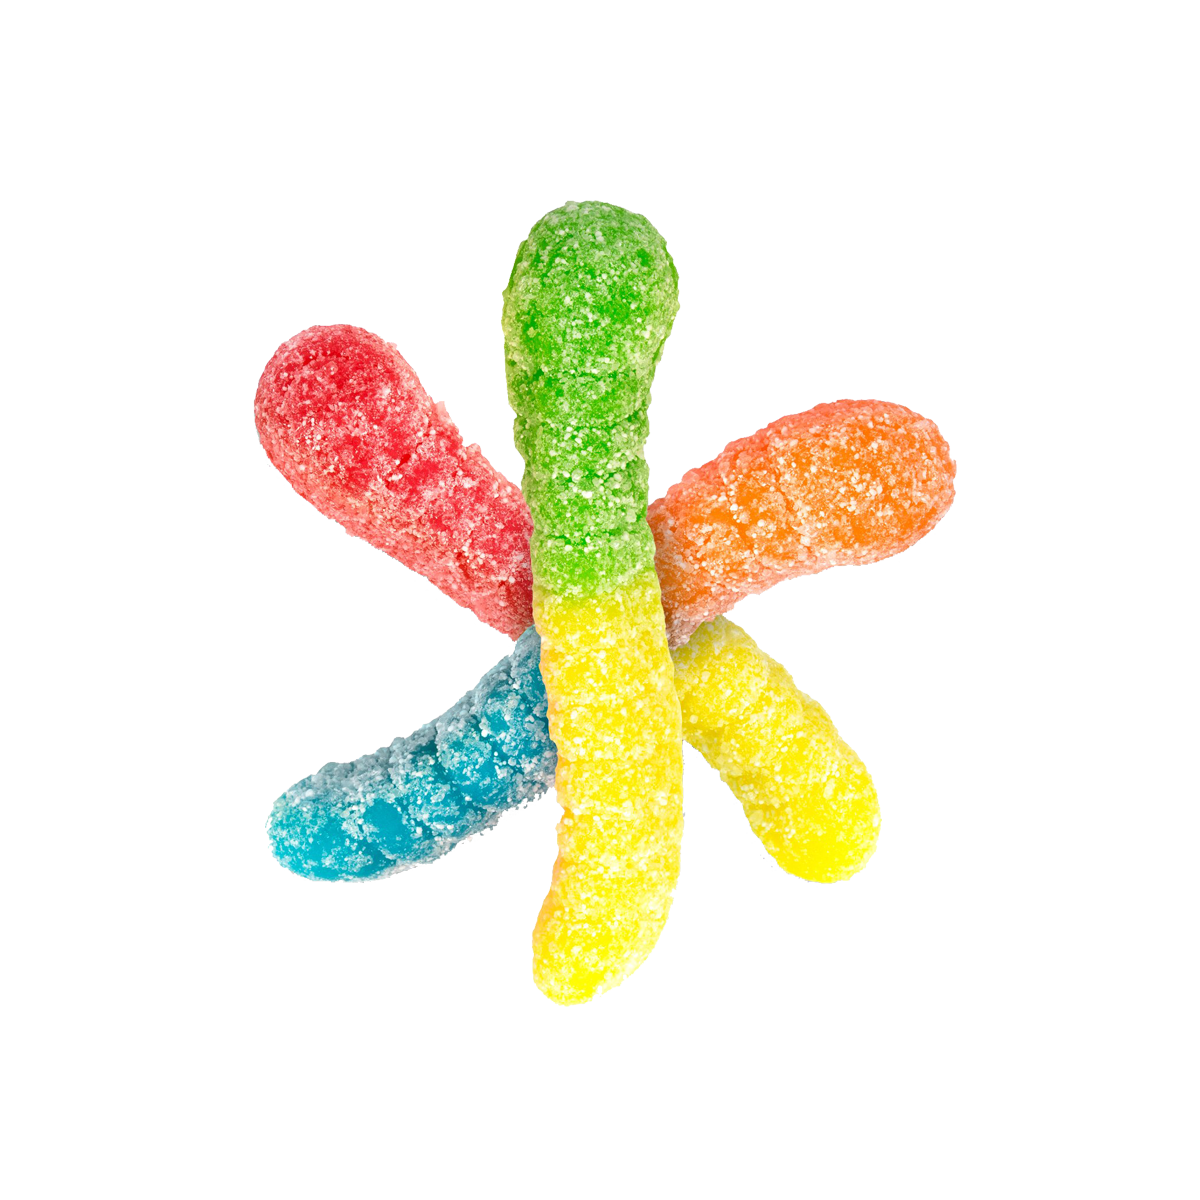 CBD Sour Gummy Worms are available at GoodCBD.com.  We specialize in delta 8 carts, delta 8 gummies, delta 8 oil, and delta 8 flower.  Our website carries brands such as: 3CHI, Good CBD, Urb, Injoy Extracts, AiroPro, Delta Effex, and more.  Free shipping on orders $50.00 or more.